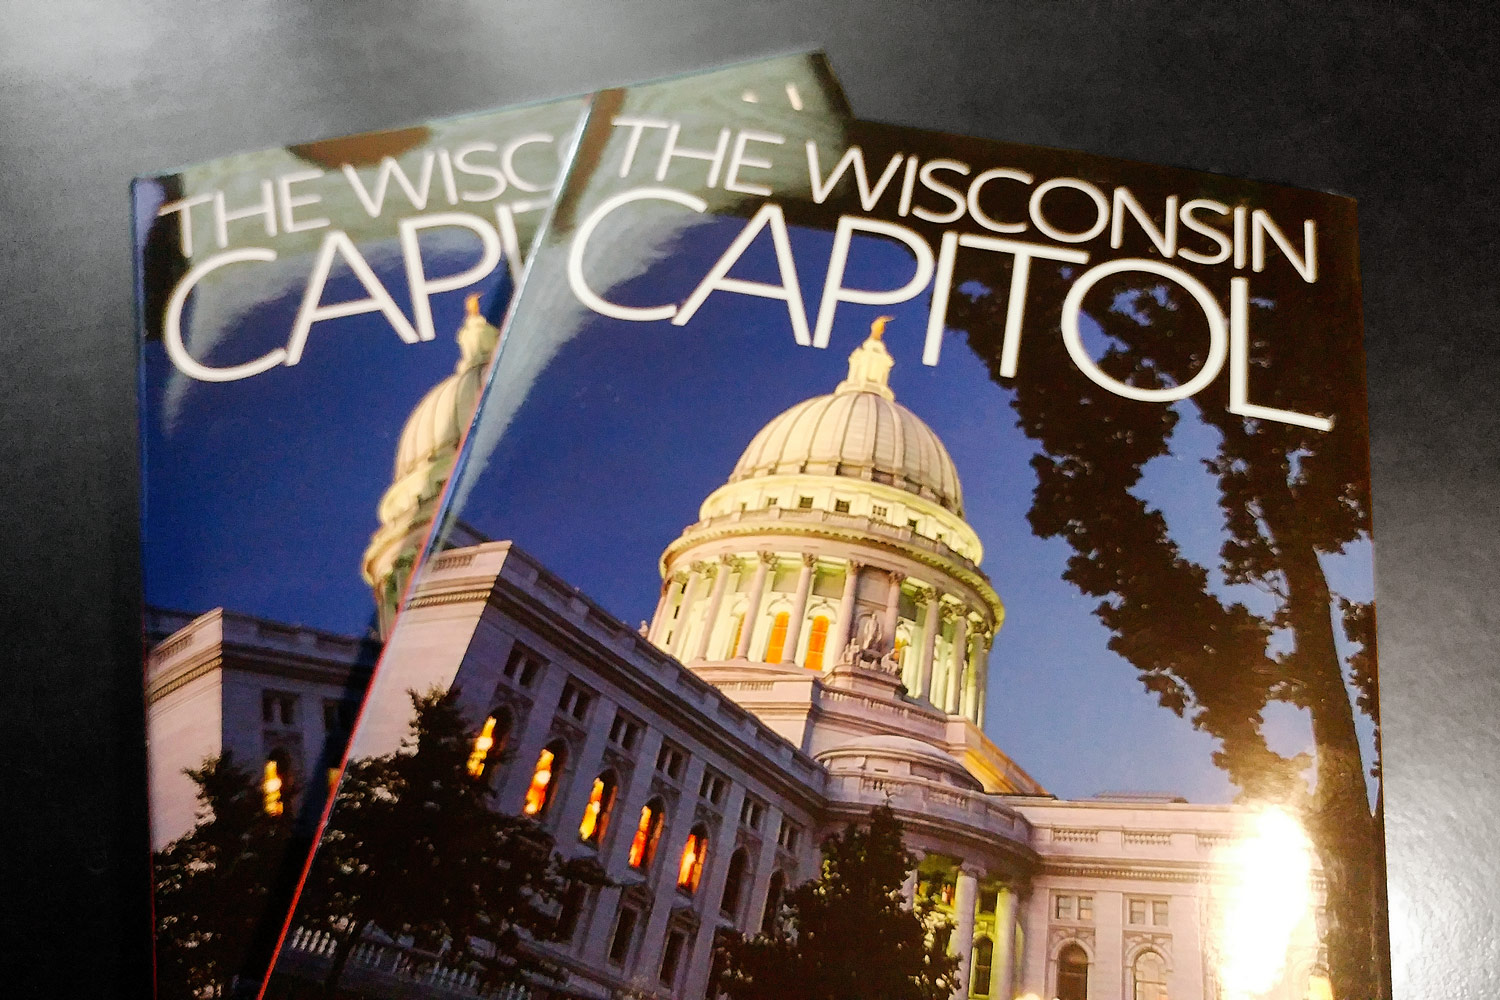 My photo of the Wisconsin state capitol is featured on the cover of the book "The Wisconsin Capitol: Stories of a Monument and Its People" published by the Wisconsin Historical Society Press.